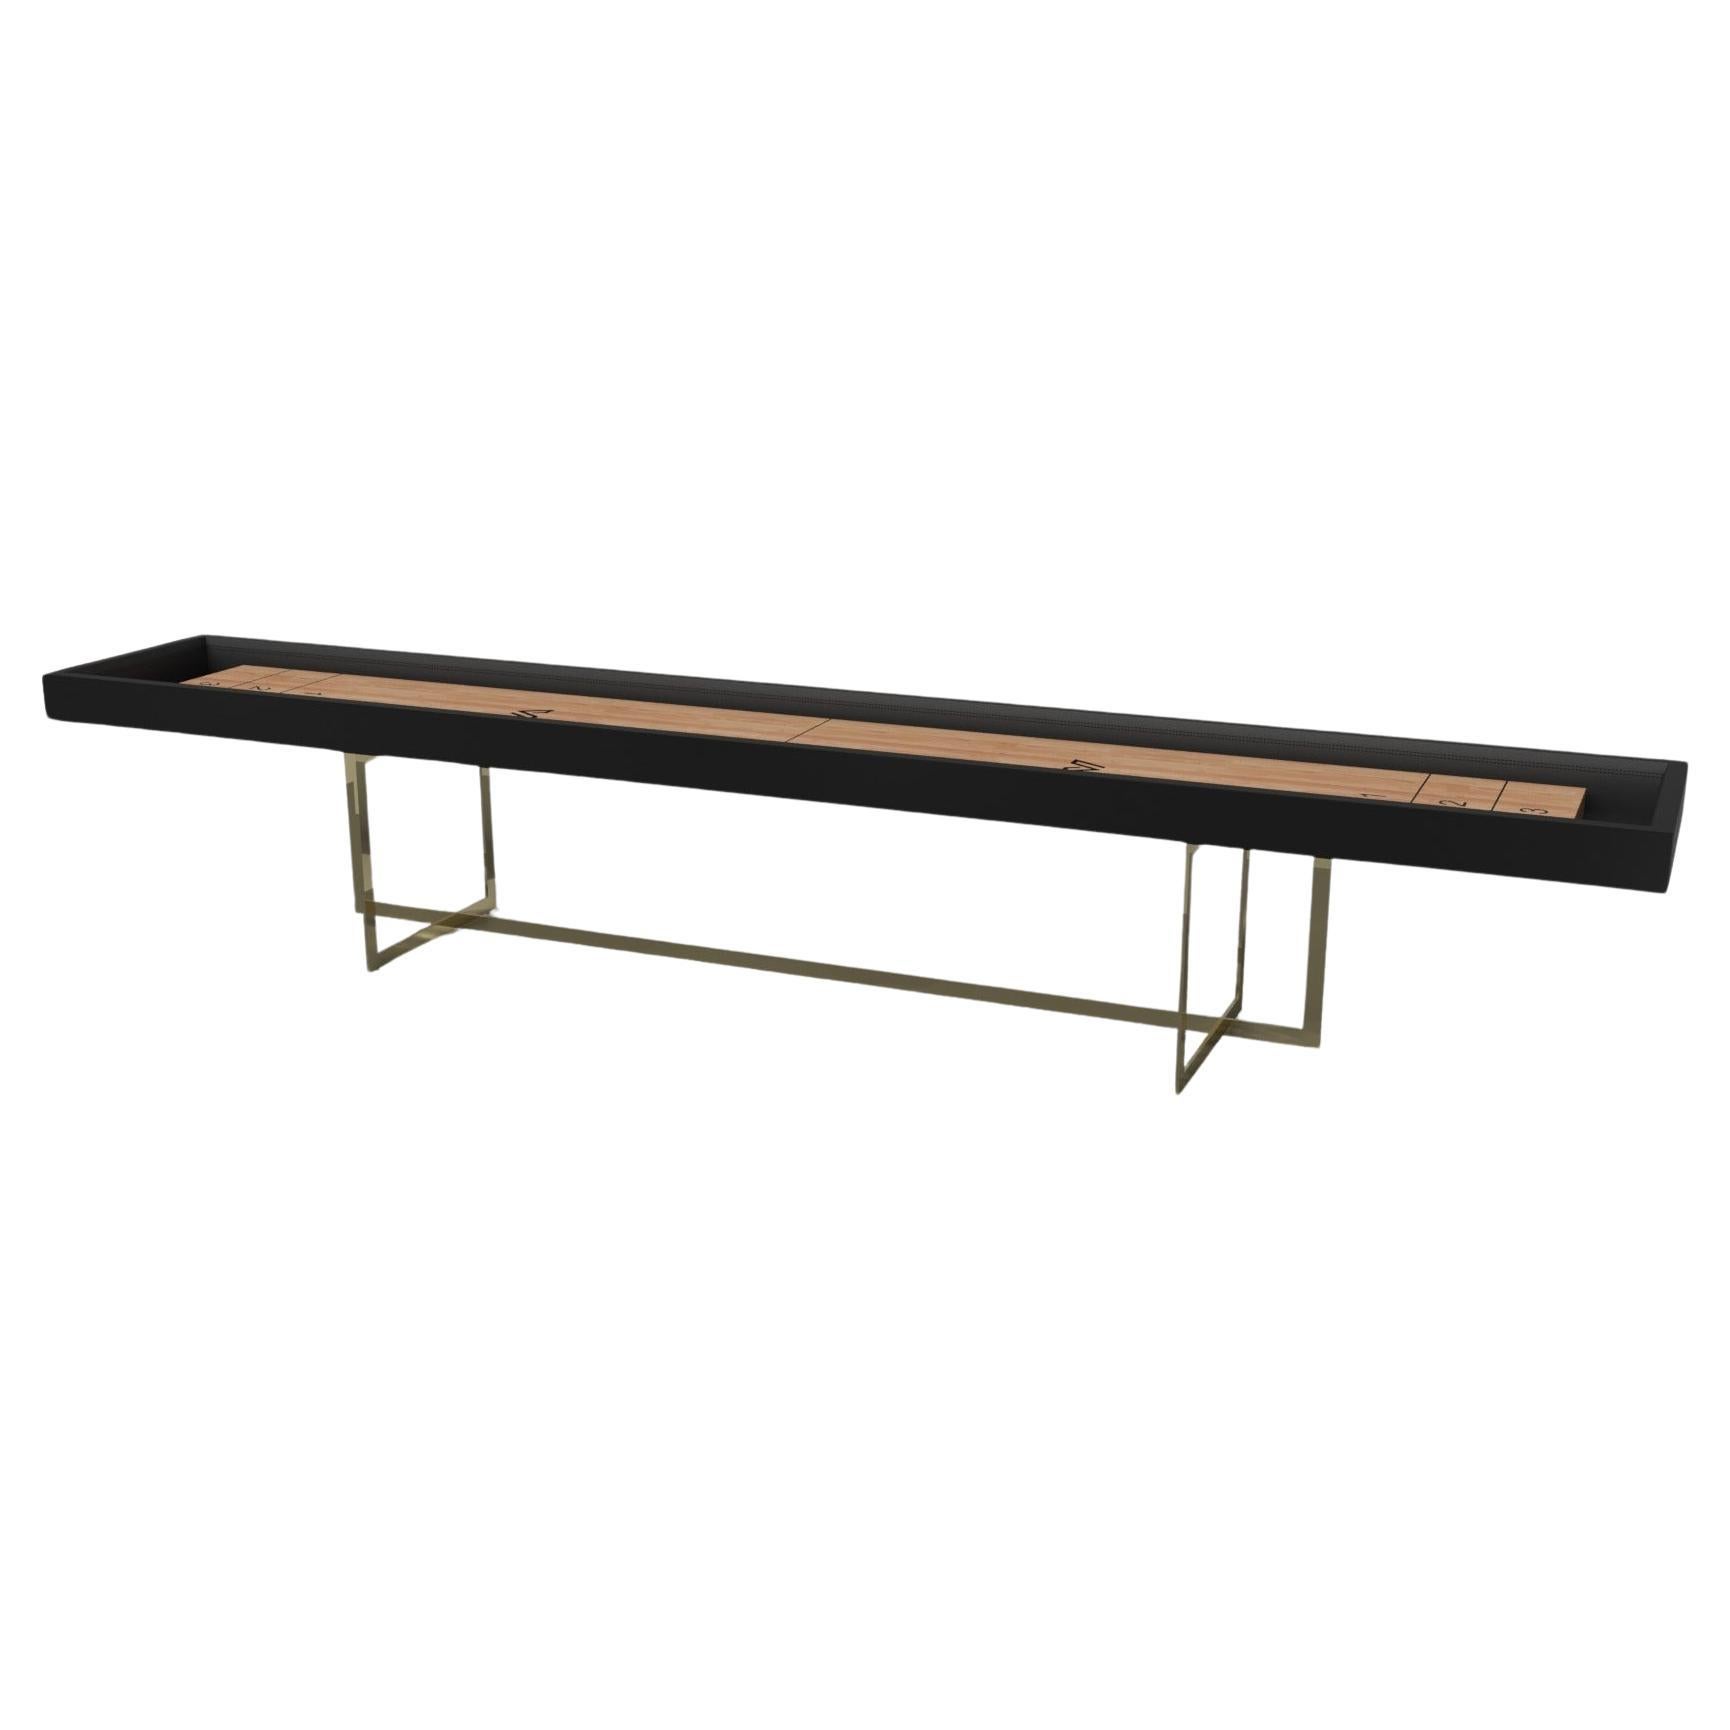 Elevate Customs Beso Shuffleboard Tables/Brass Stainless Steel Metal in 18' -USA